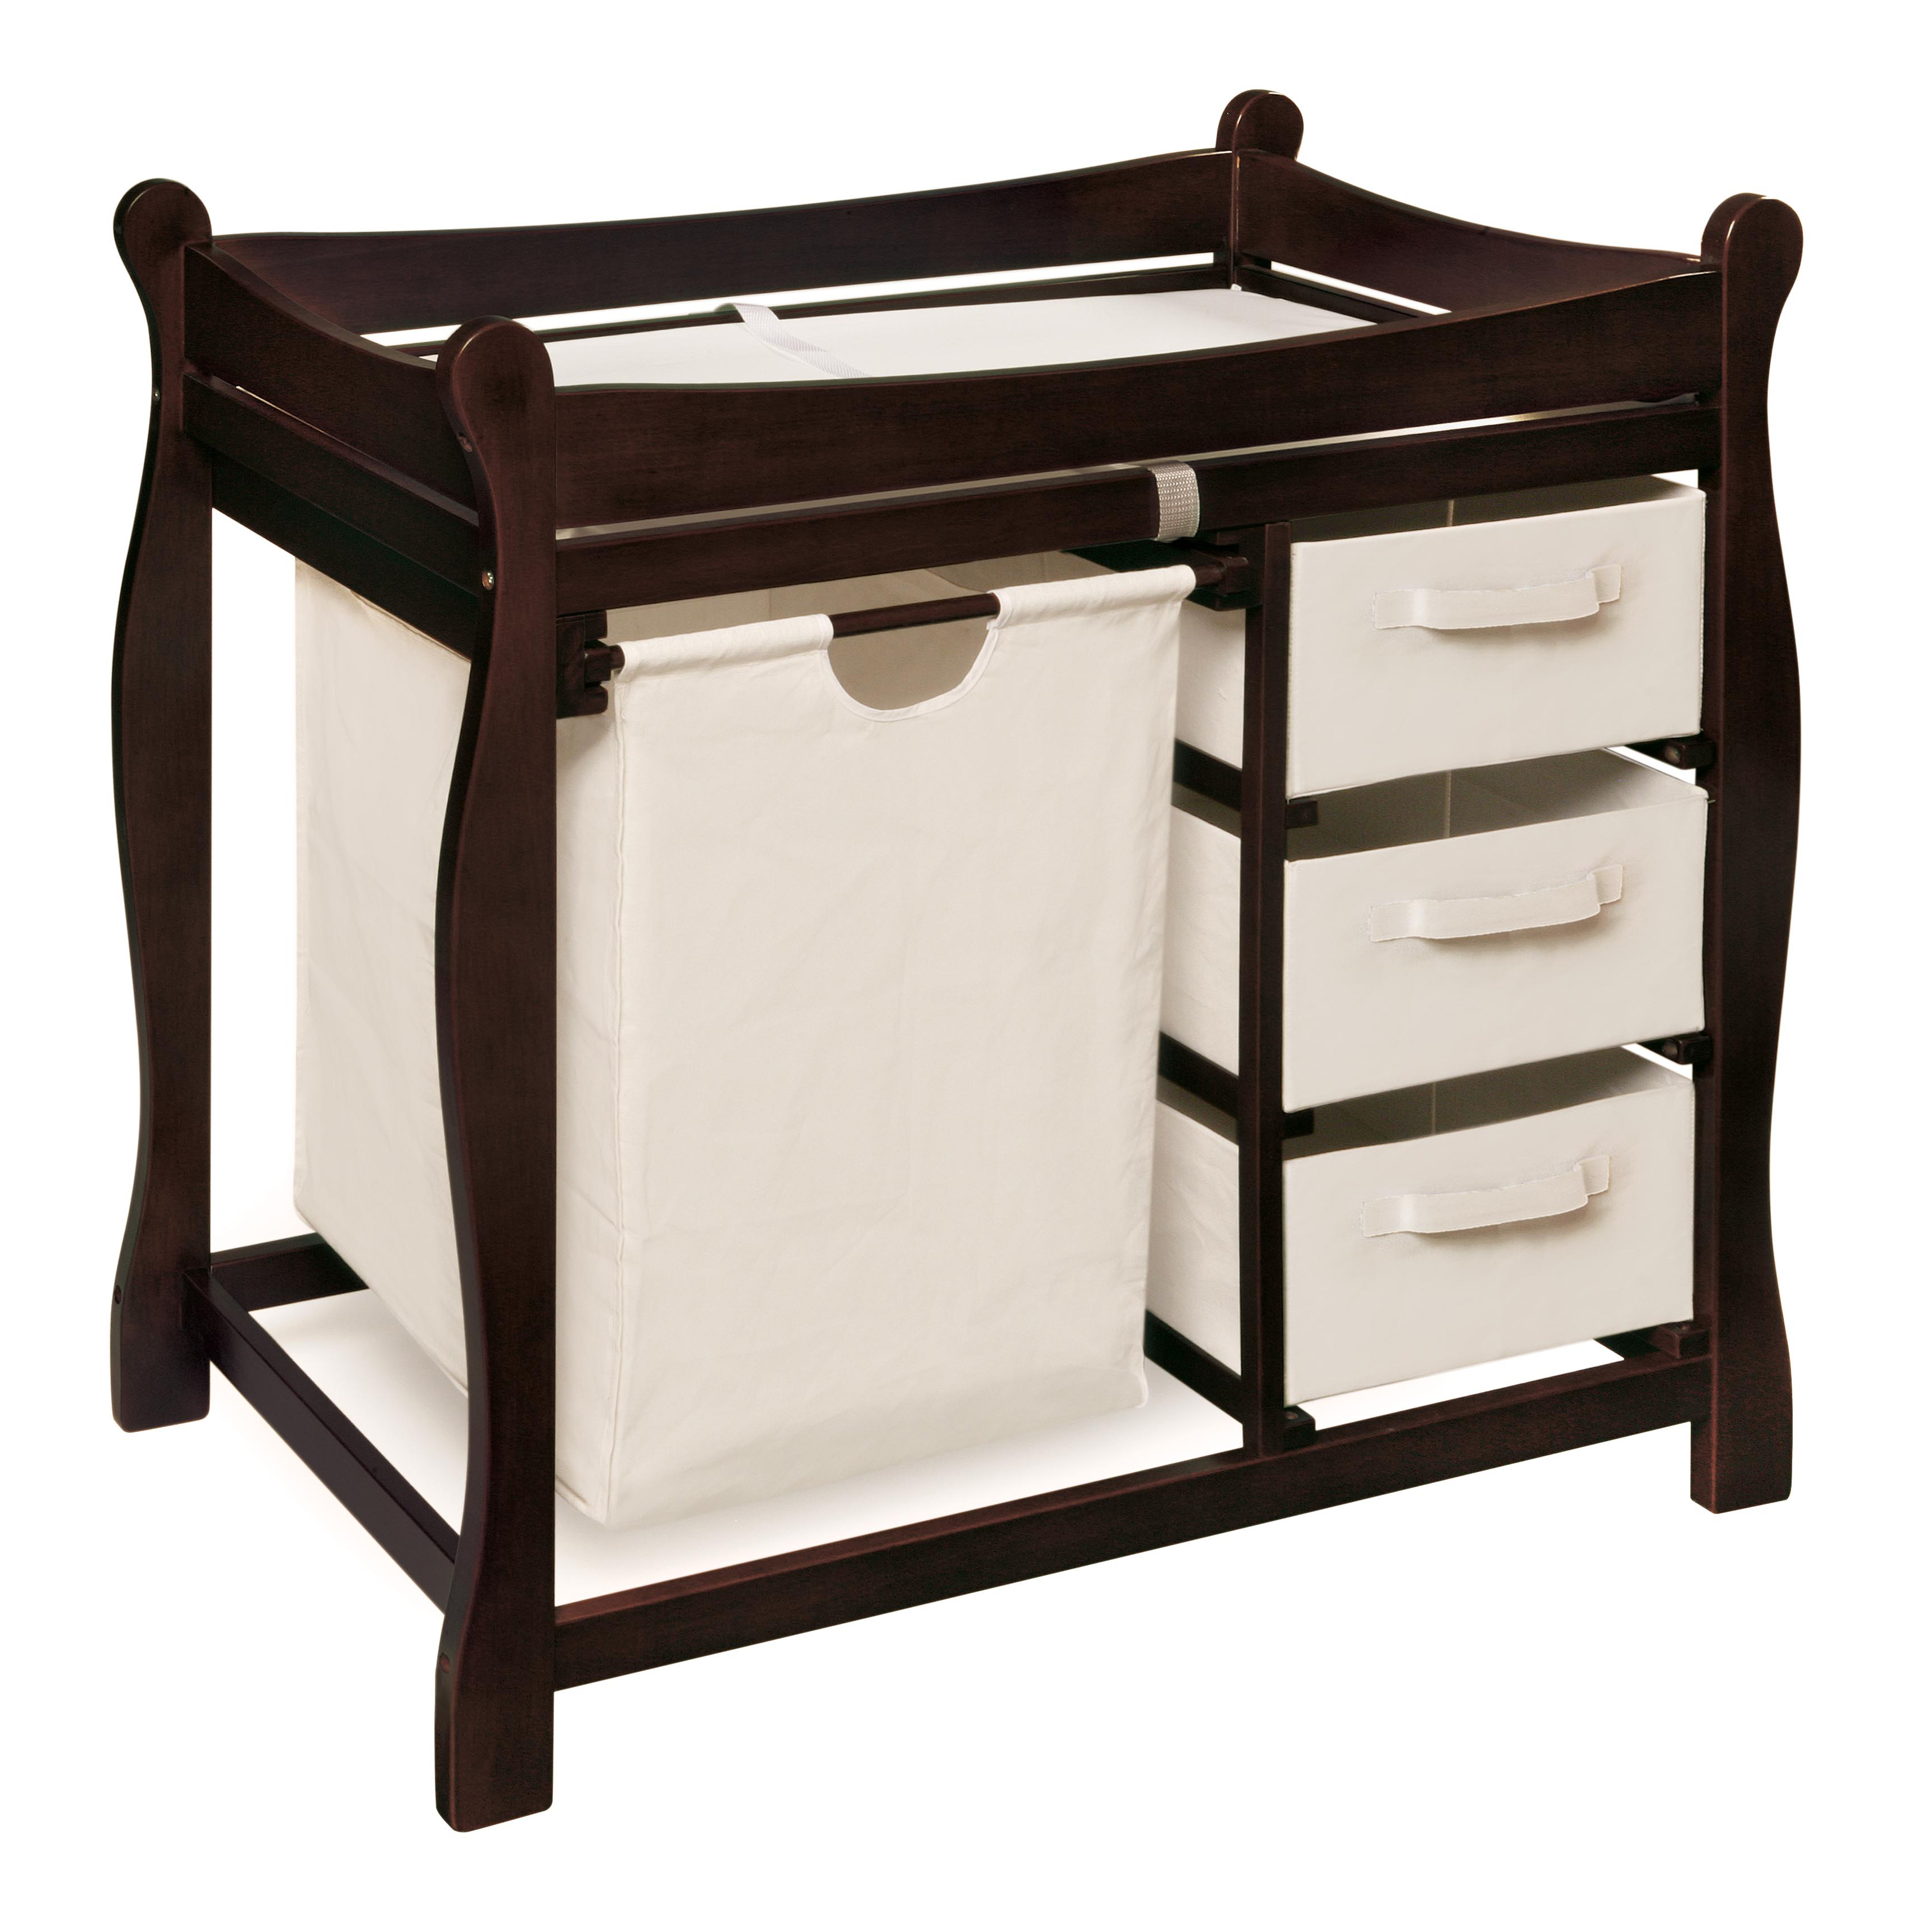 Sleigh Style Baby Changing Table with Hamper and 3 Baskets - Espresso